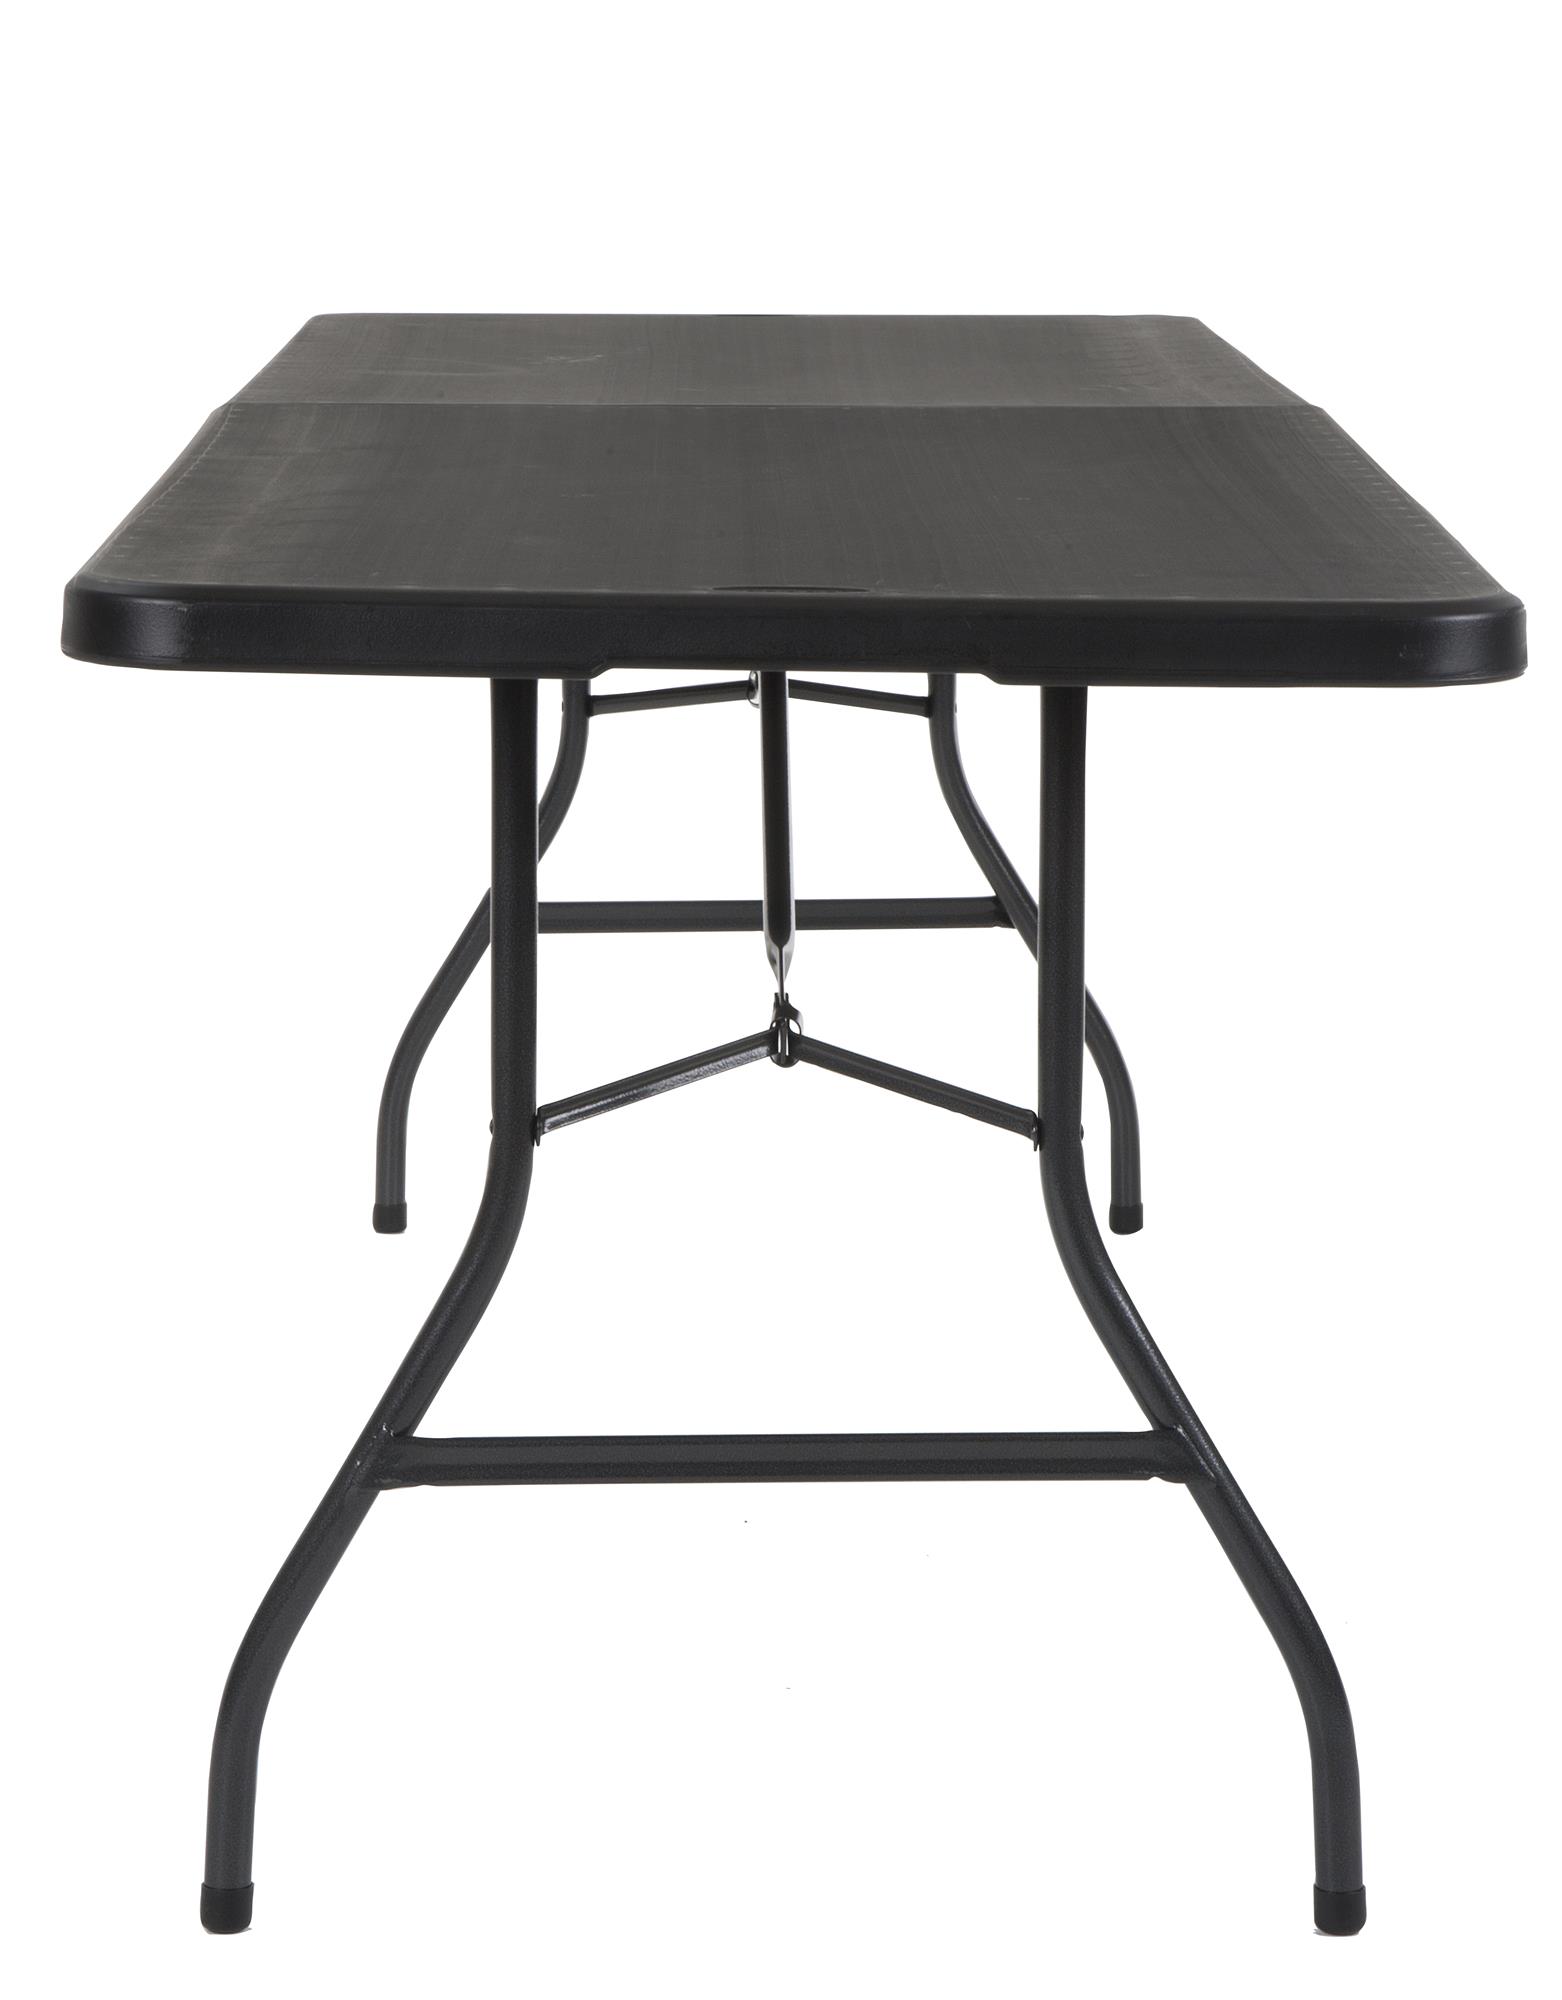 Cosco 8 Foot Centerfold Folding Table, Black - image 3 of 9